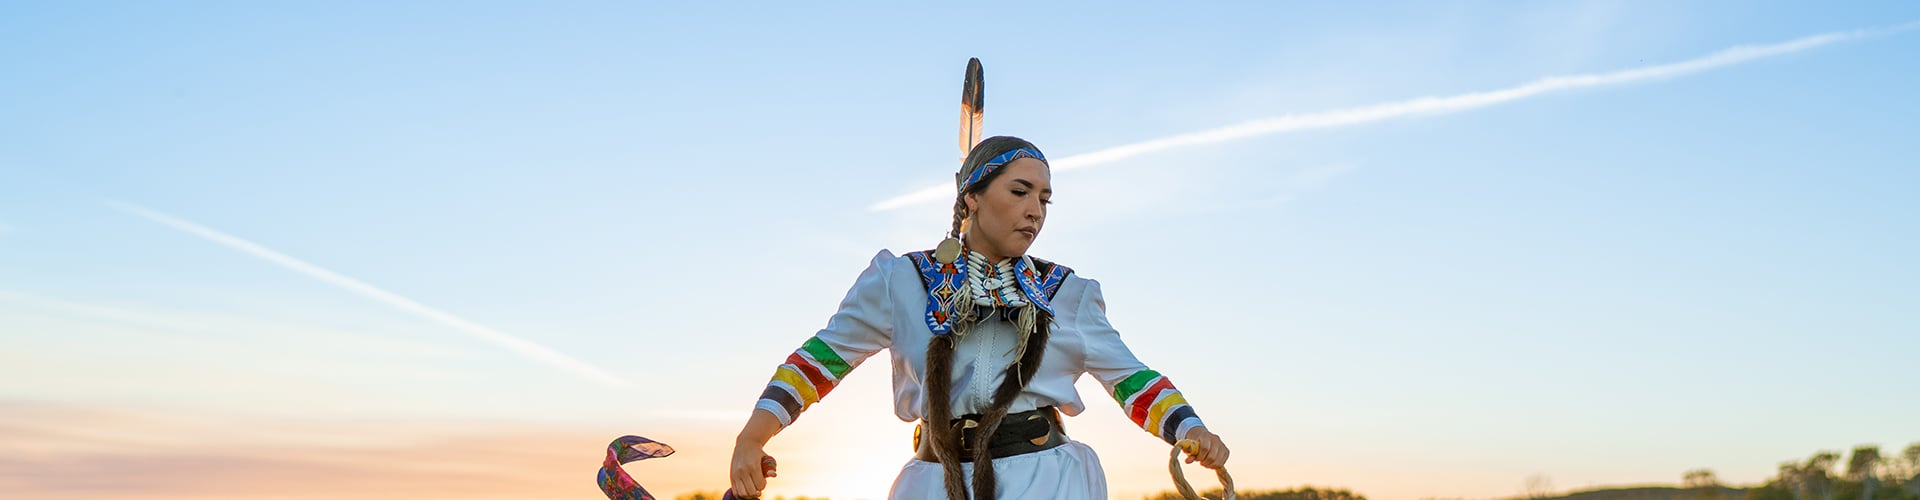 Indigenous woman dancer on a field at evening